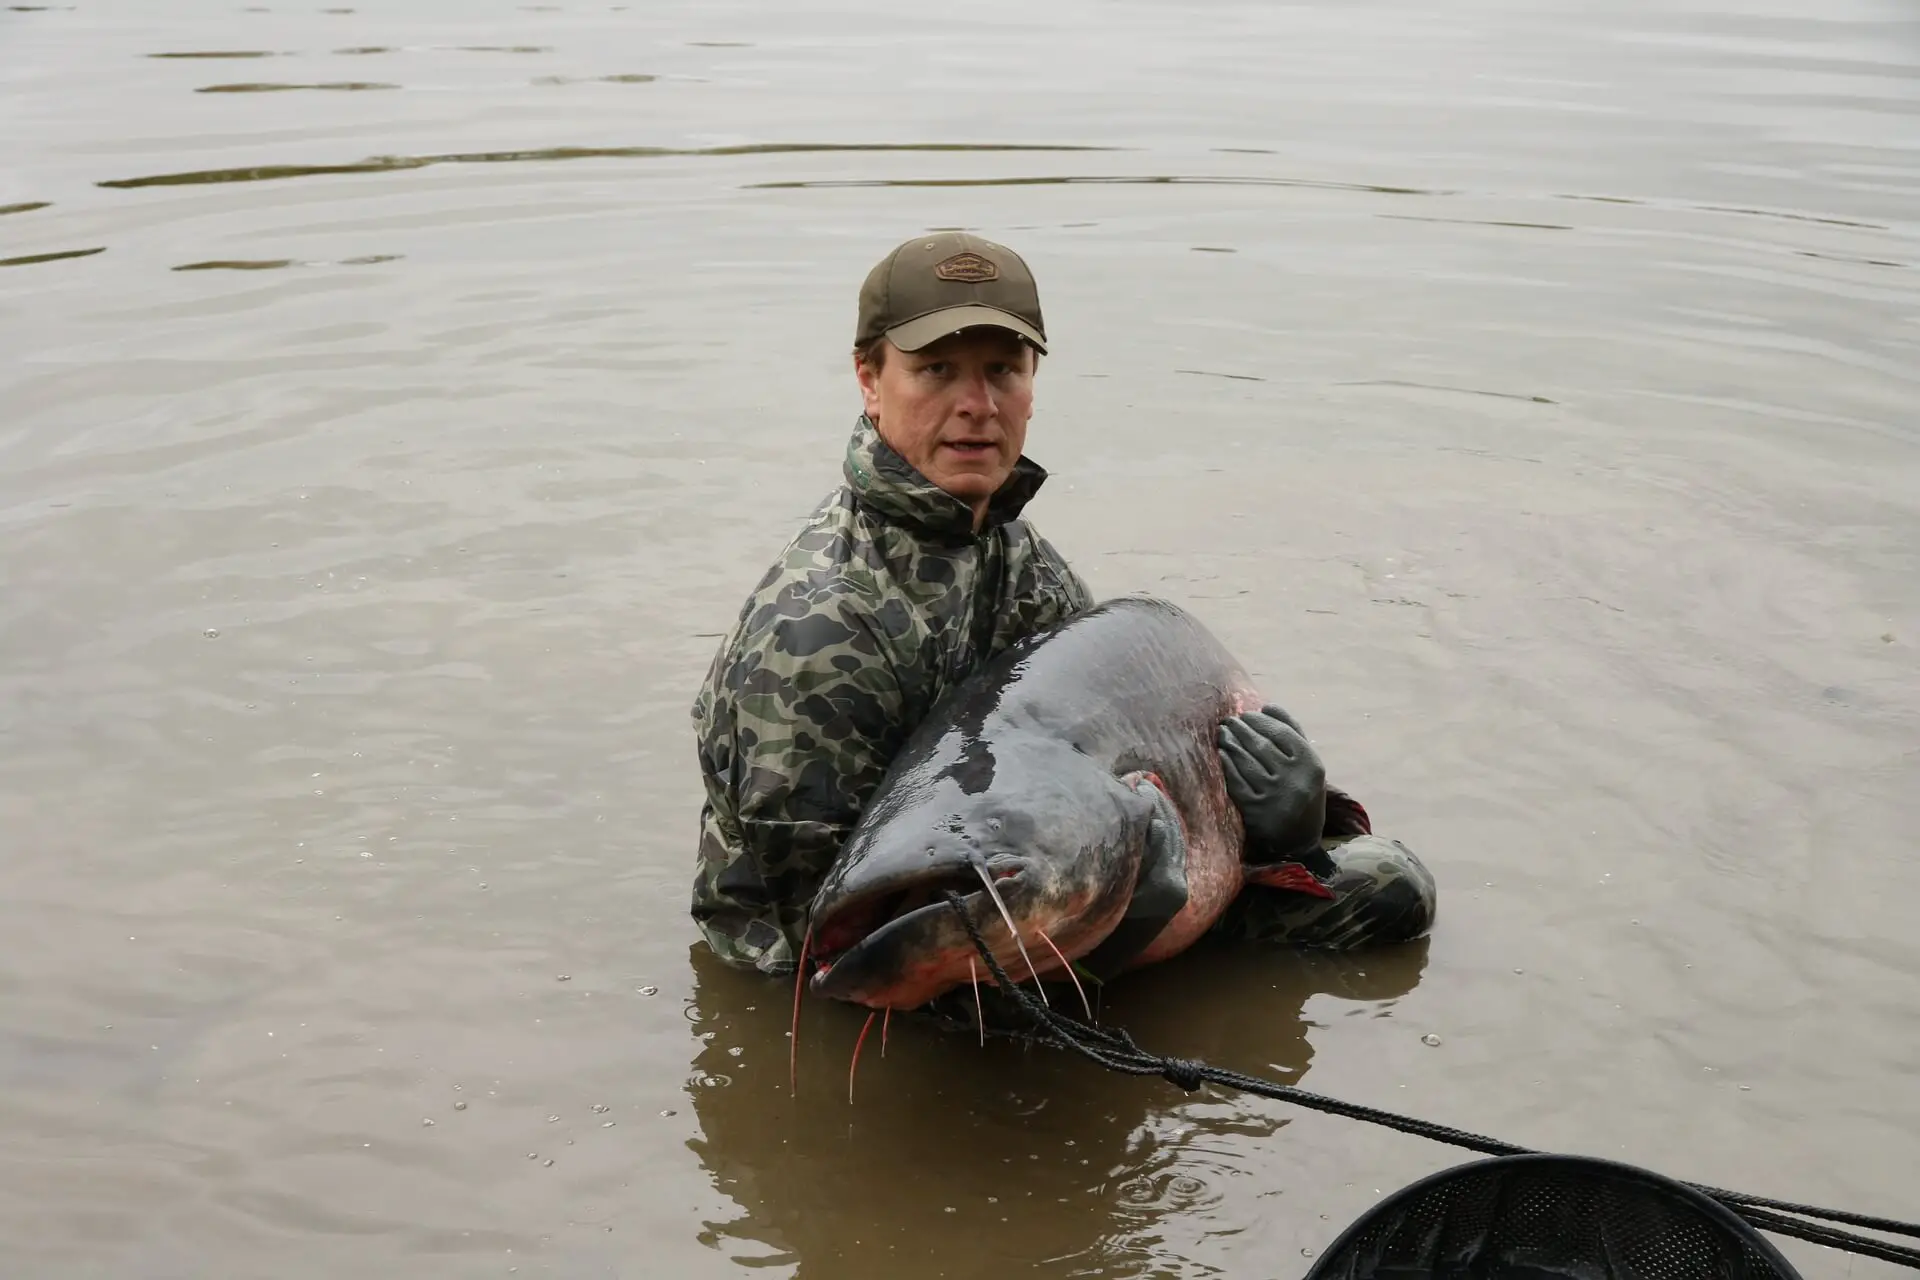 Huge Catfish in the hands of an angler